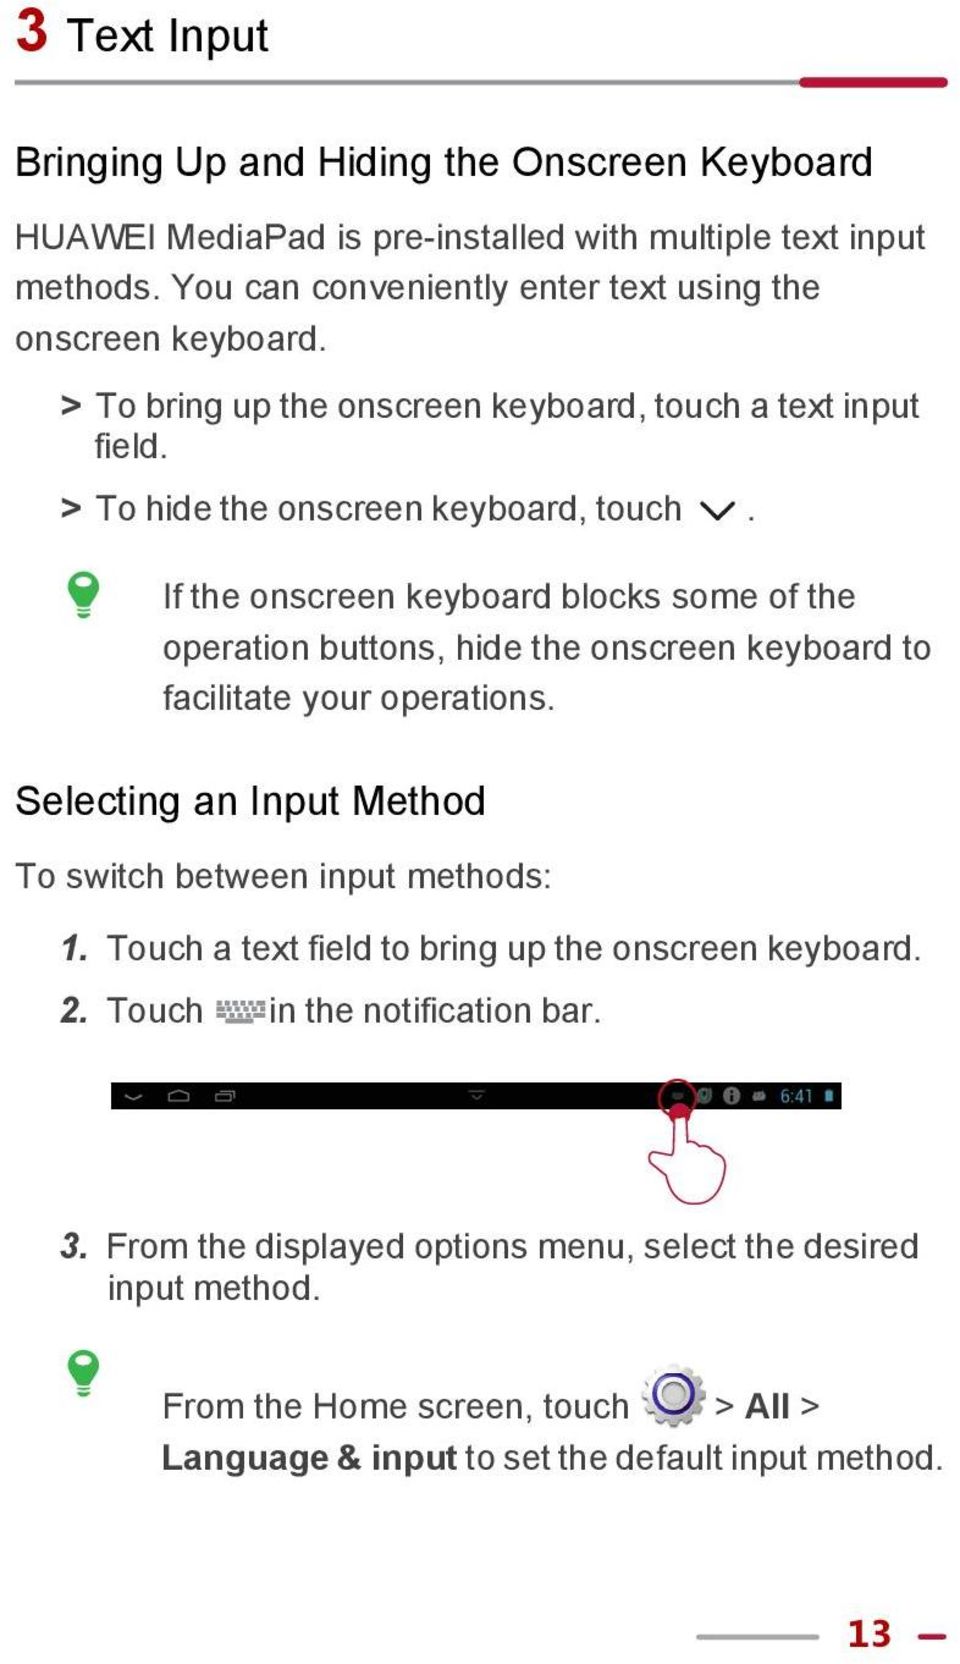 If the onscreen keyboard blocks some of the operation buttons, hide the onscreen keyboard to facilitate your operations.